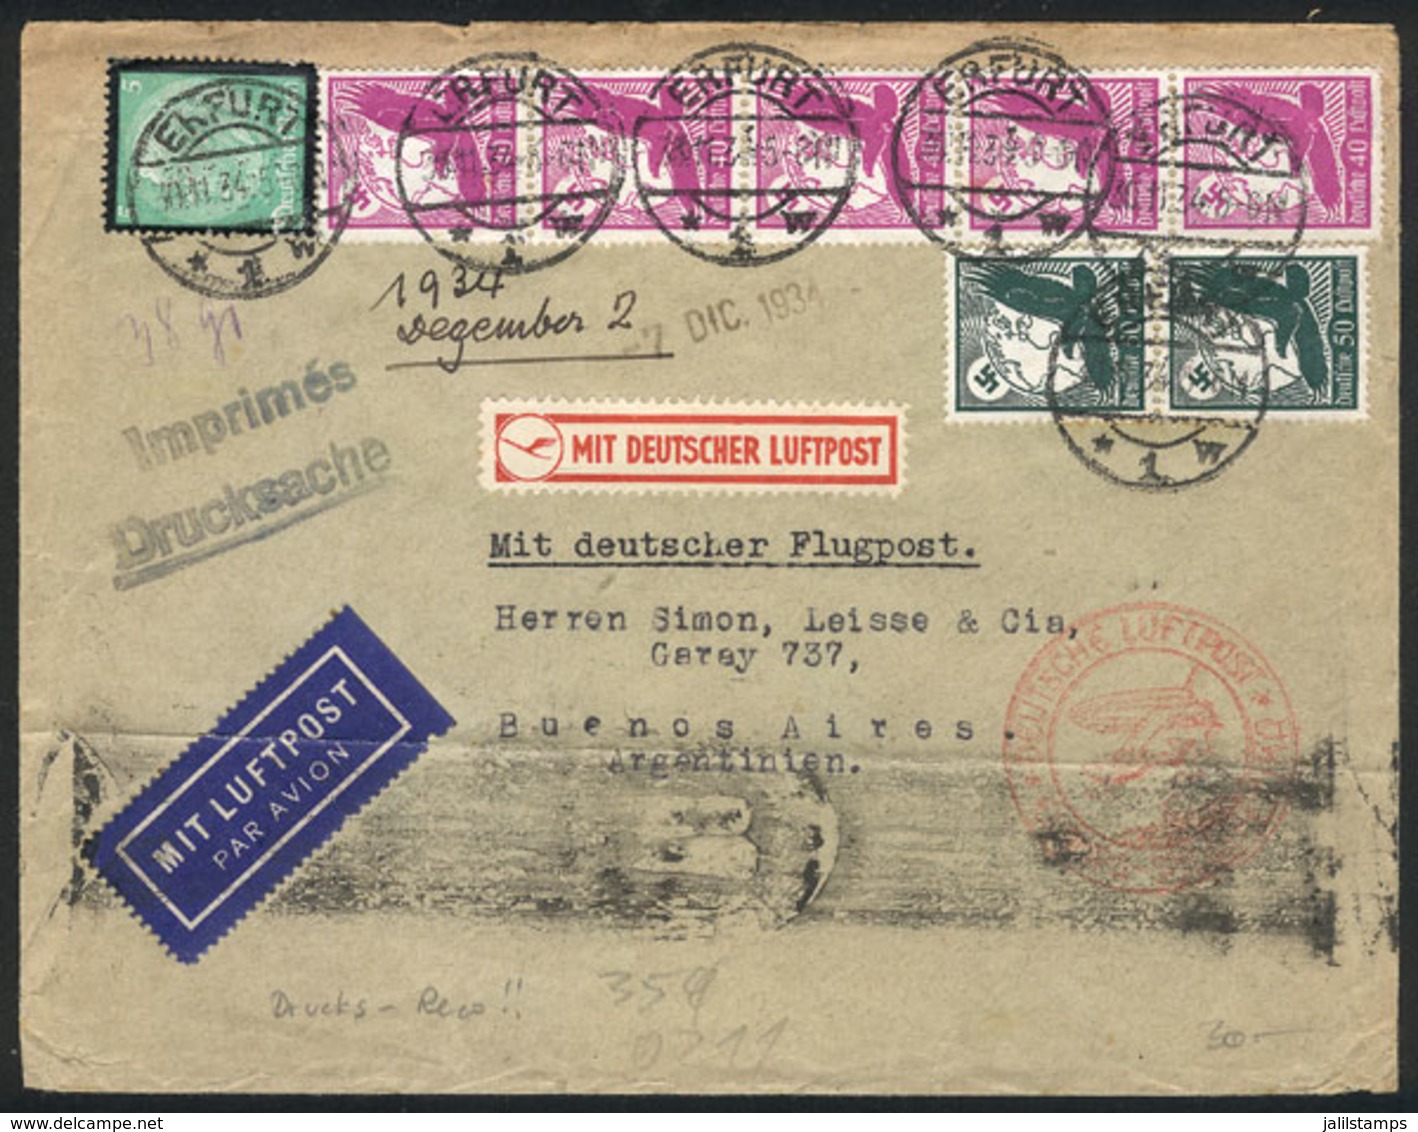 GERMANY: Airmail Cover (it Contained Printed Matter) Sent From Erfurt To Buenos Aires On 30/NO/1934 Franked With 3.05Mk. - Prephilately